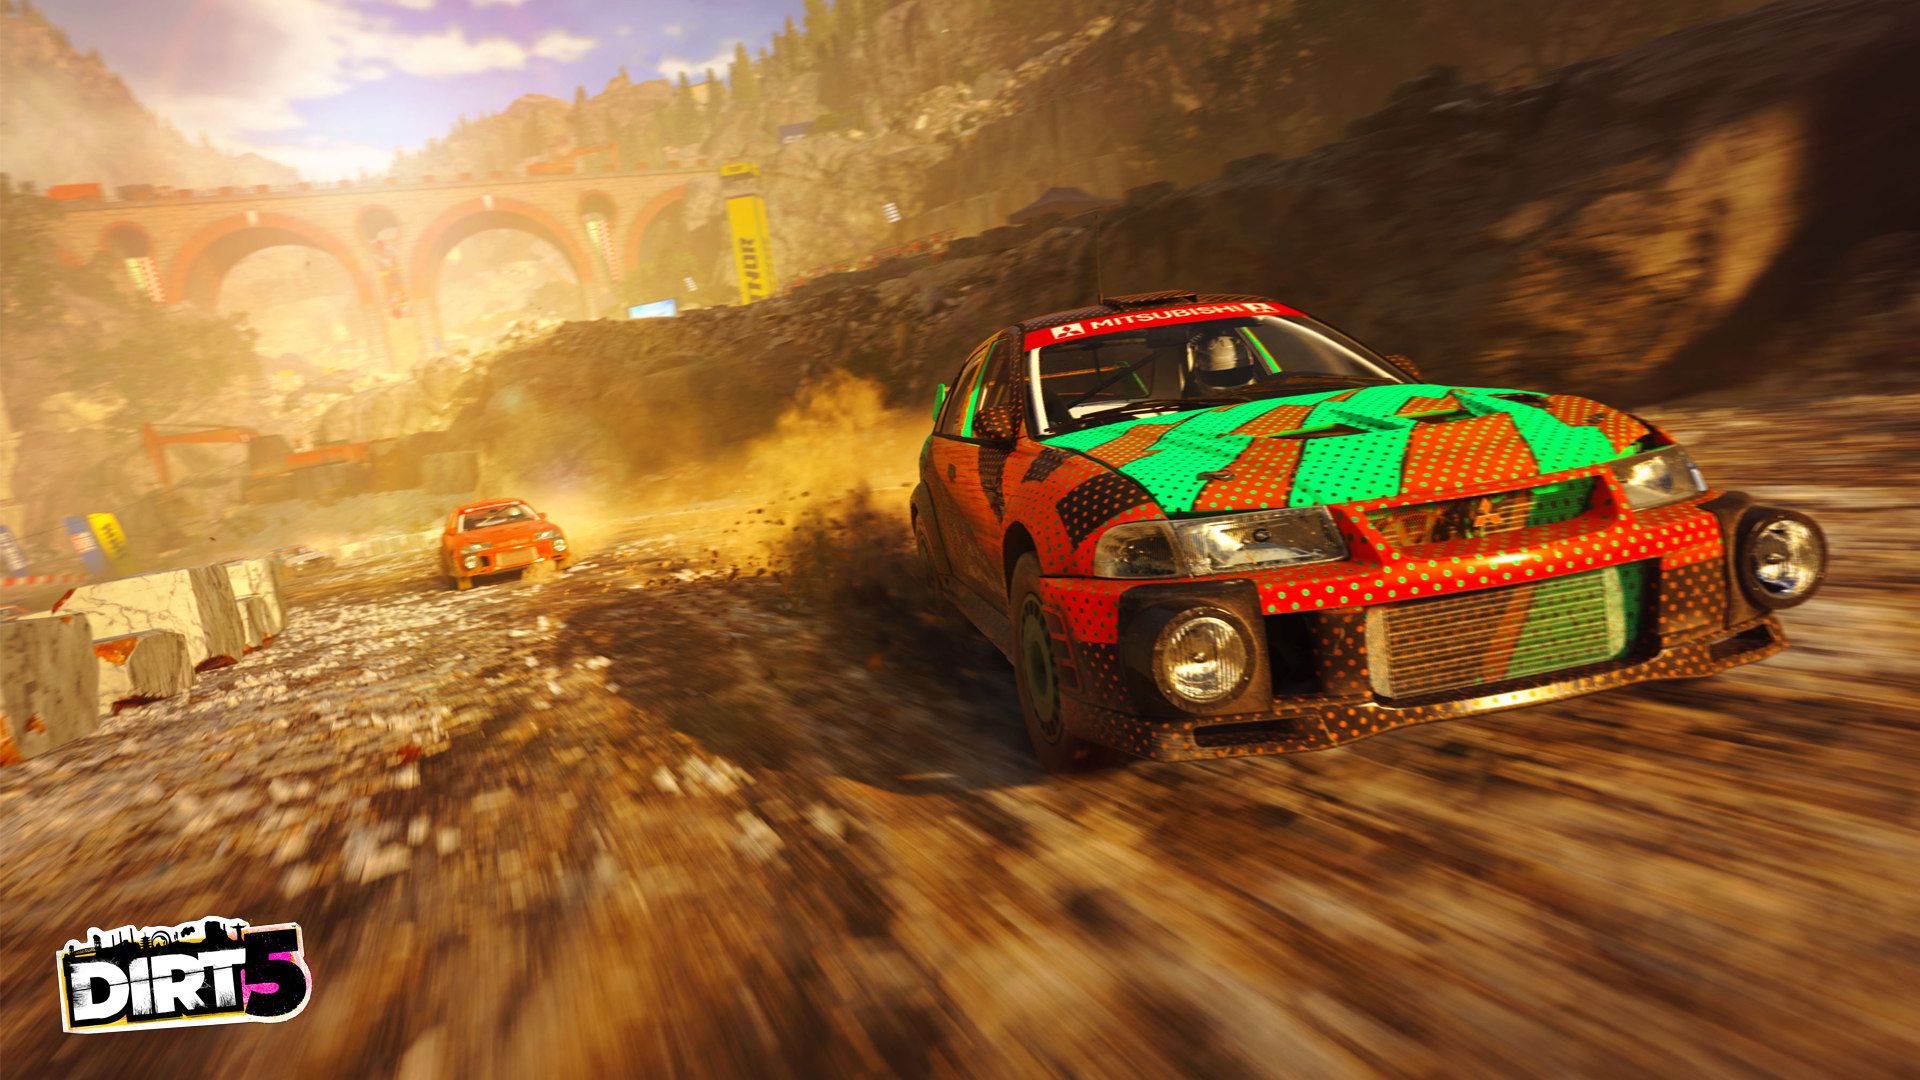 DiRT 5 Wallpaper, HD Games 4K Wallpaper, Image, Photo and Background